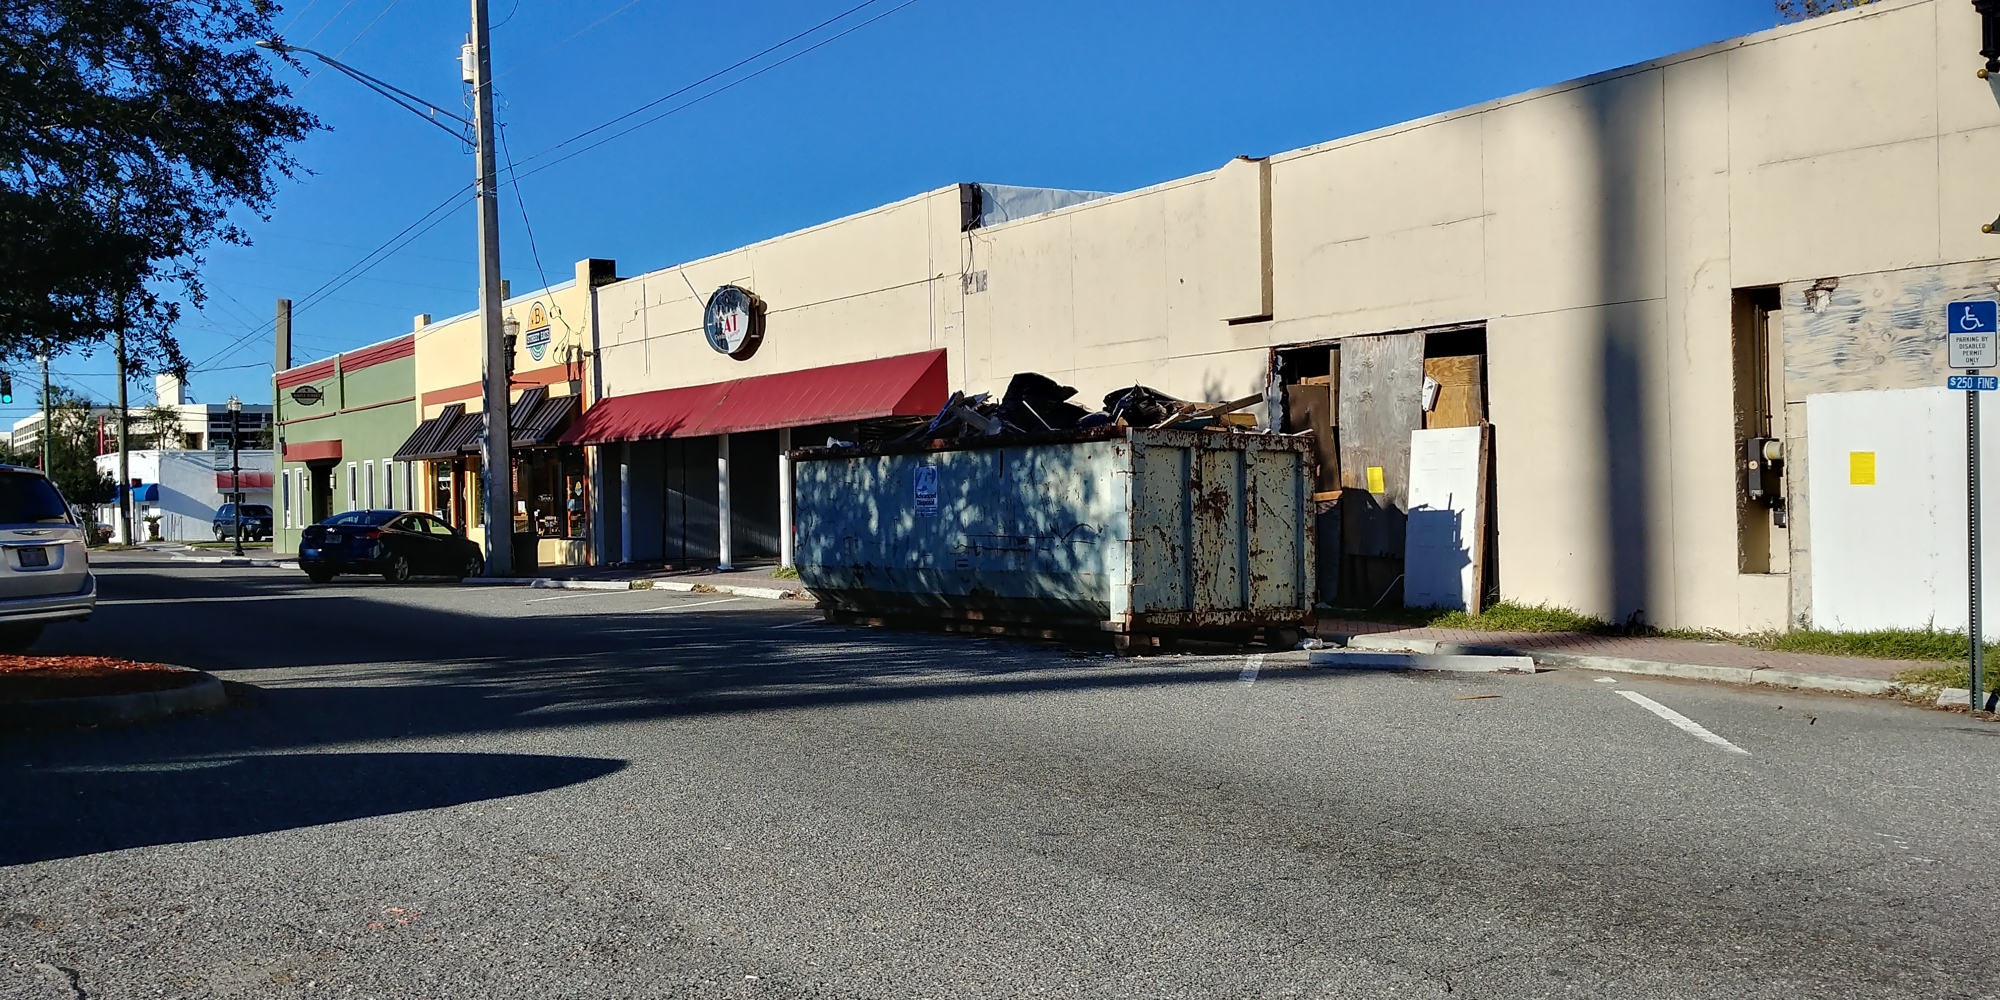 The owner of the building at 1183 Edgewood Ave. S. has begun to remove some debris from the former Fat Kat nightclub in preparation to remodel the property into the Fishweir Brewing Co.